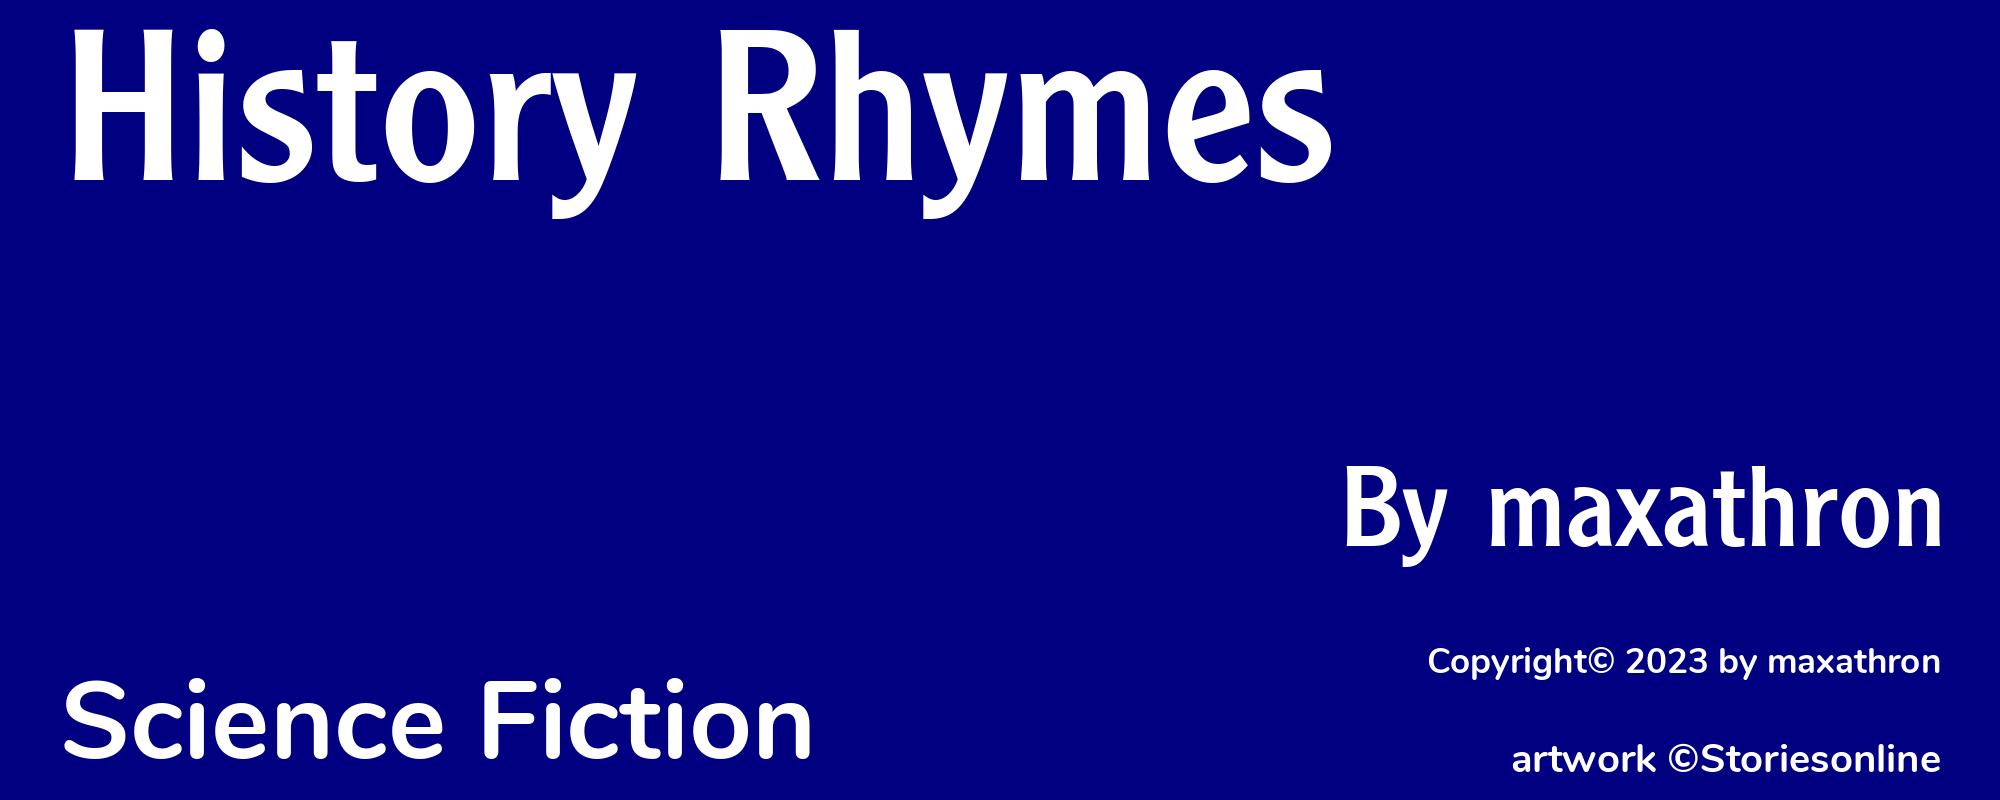 History Rhymes - Cover